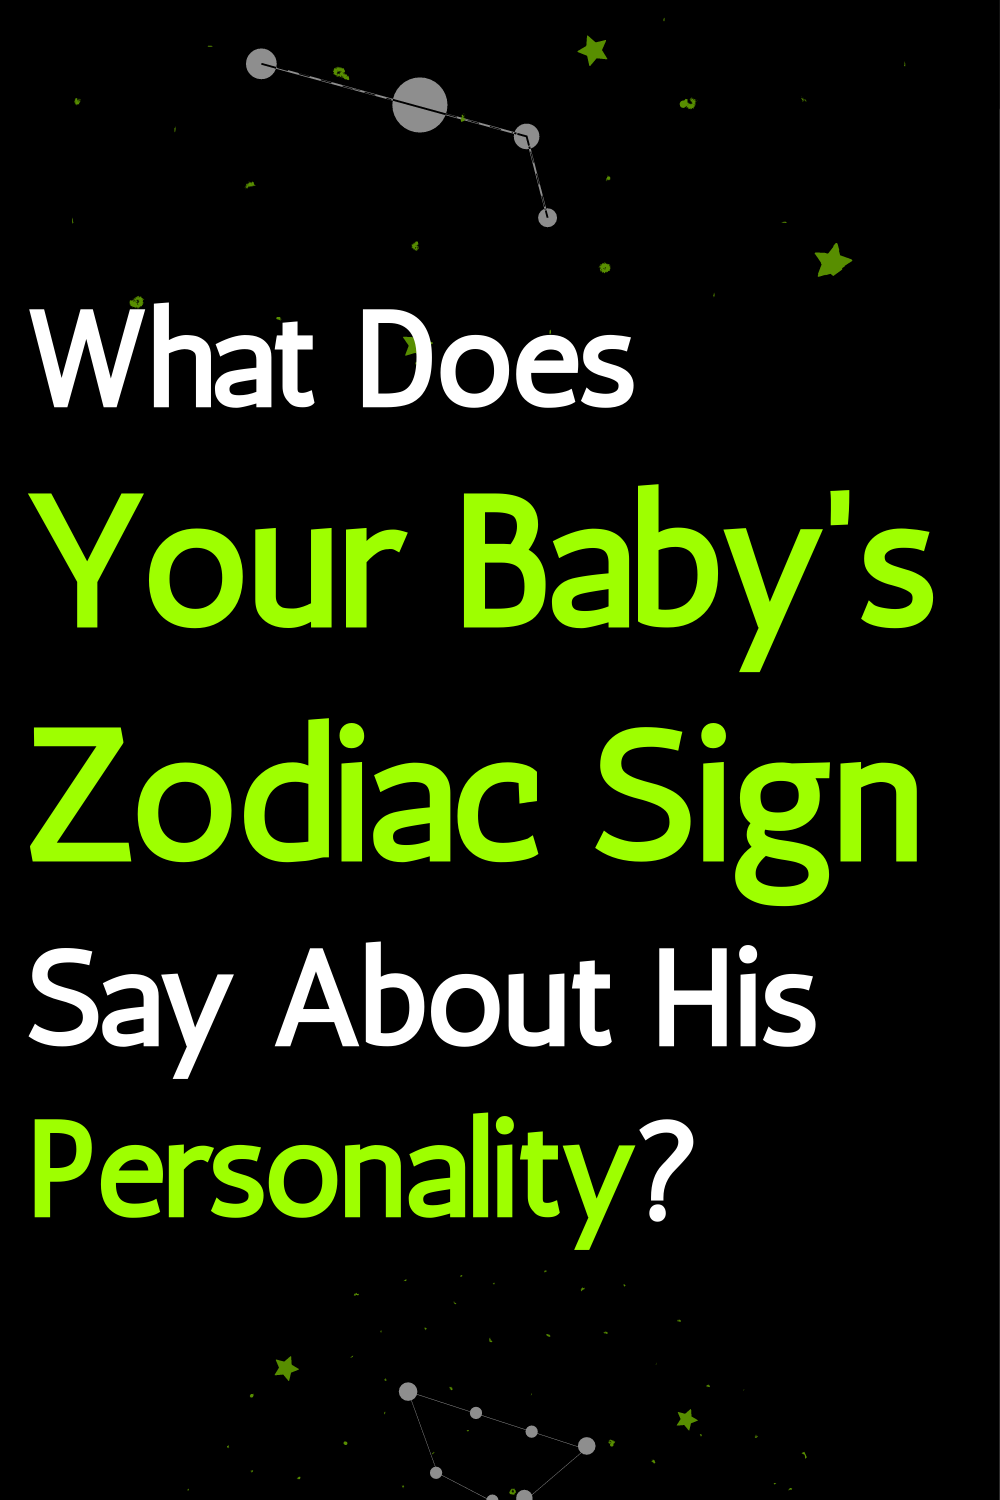 What Does Your Baby's Zodiac Sign Say About His Personality?